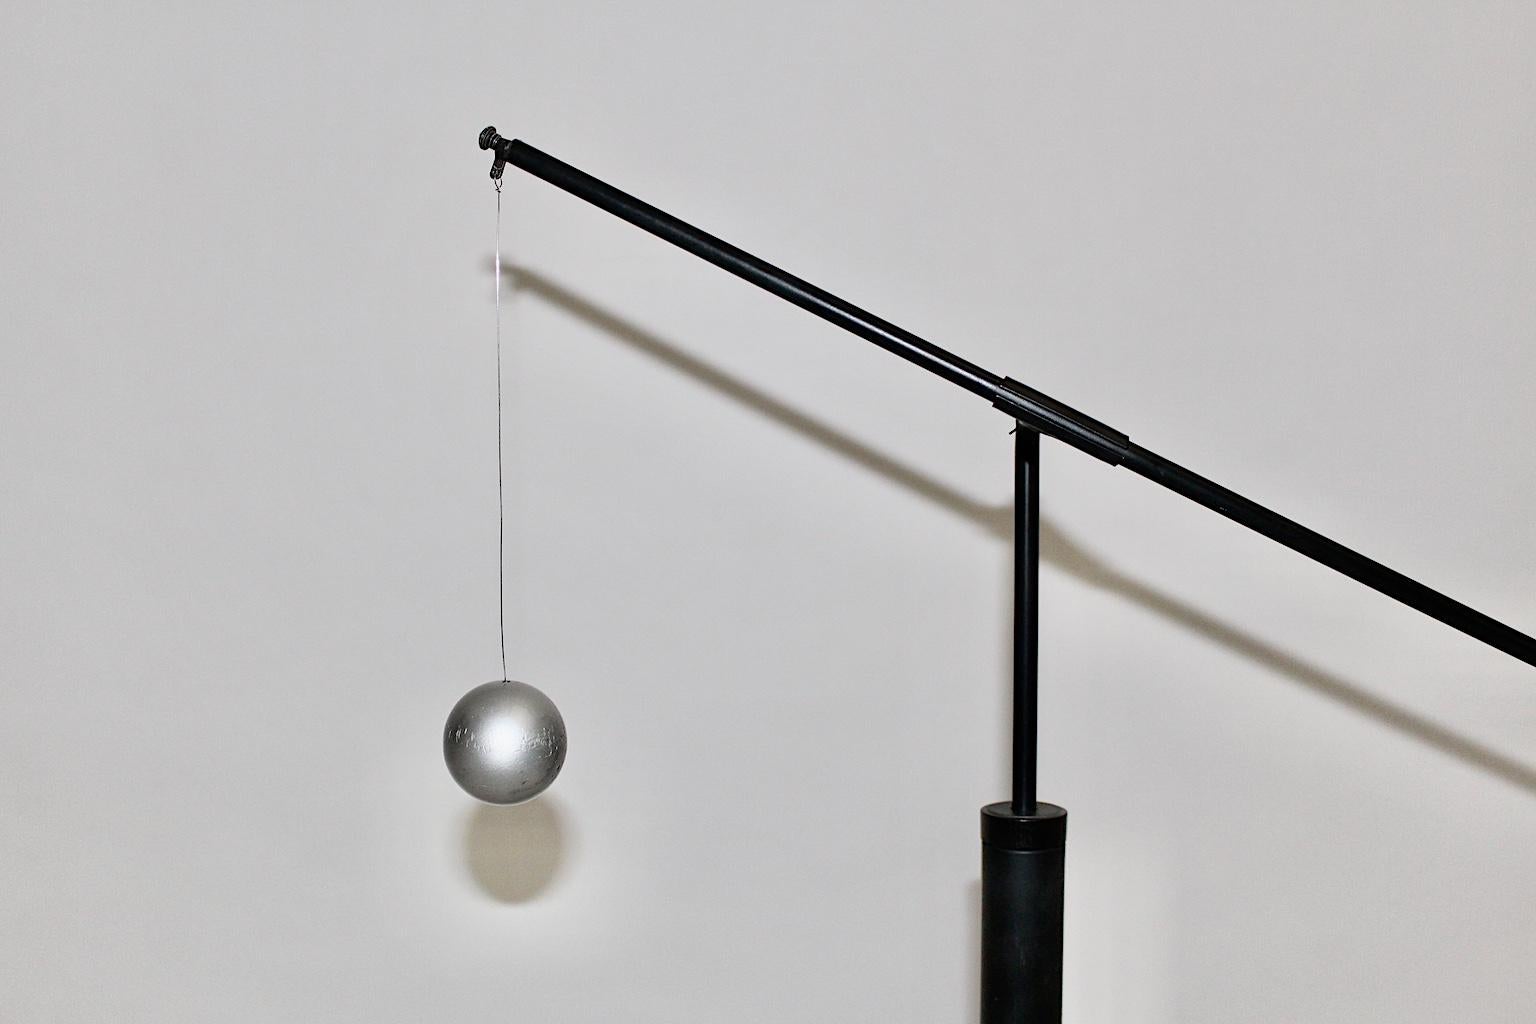 Metal Postmodern Vintage Black Floor Lamp by Carlo Forcolini 1989 for Artemide Italy For Sale